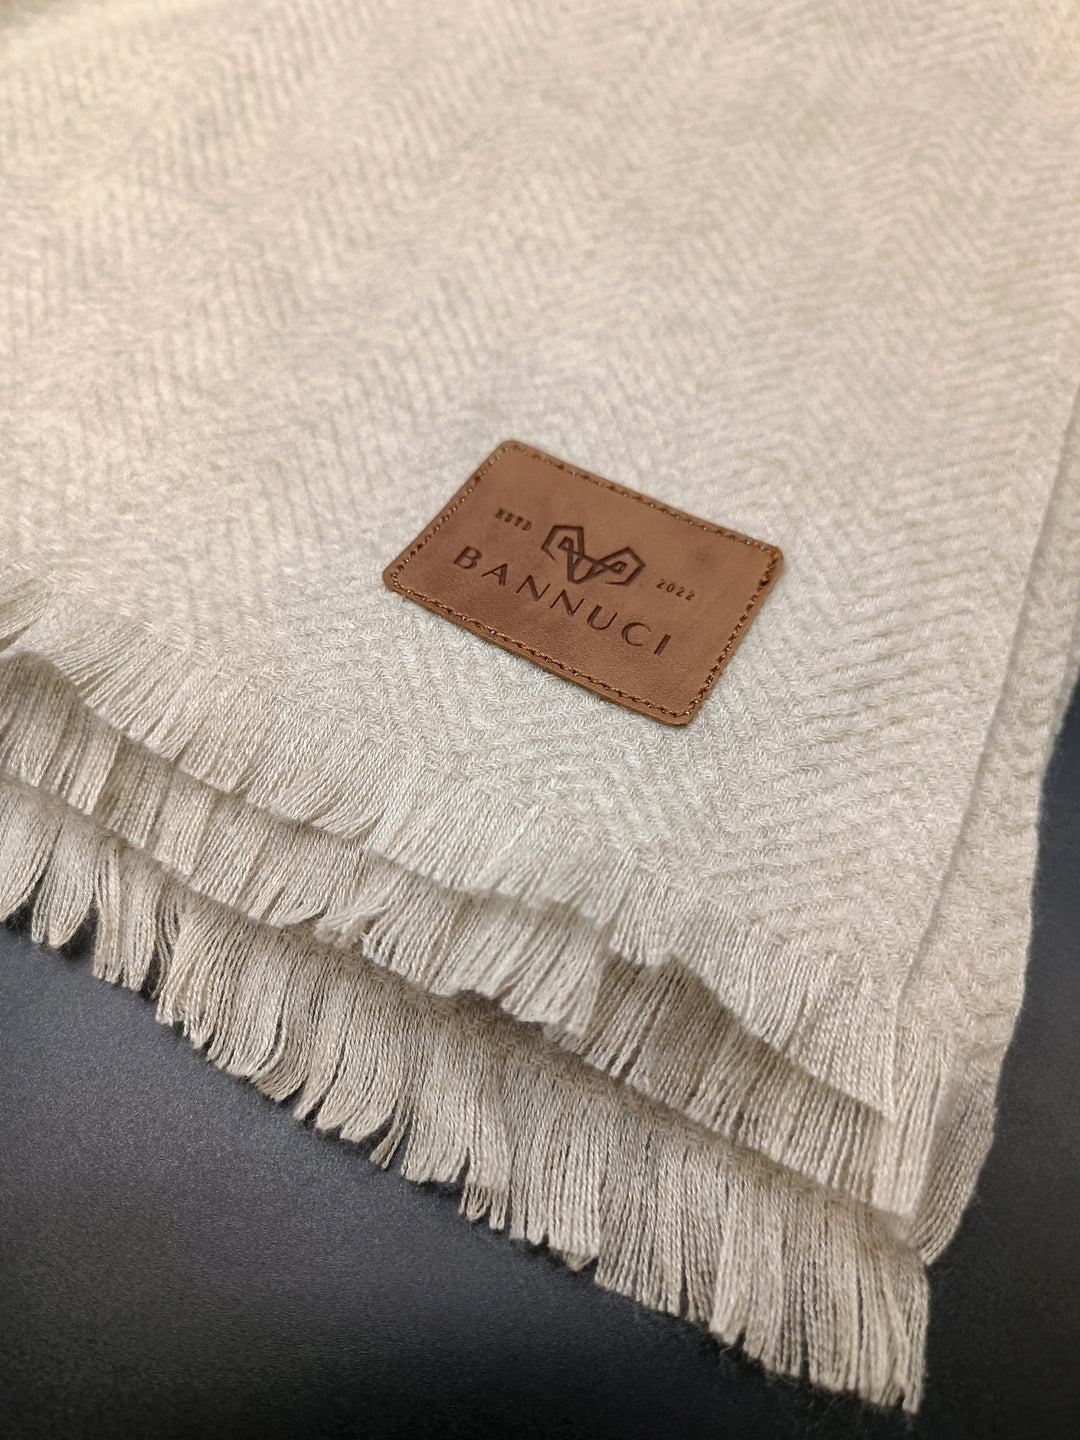 Premium Quality Extremely Soft Beige Color Pashmina Cashmere Shawl for Men